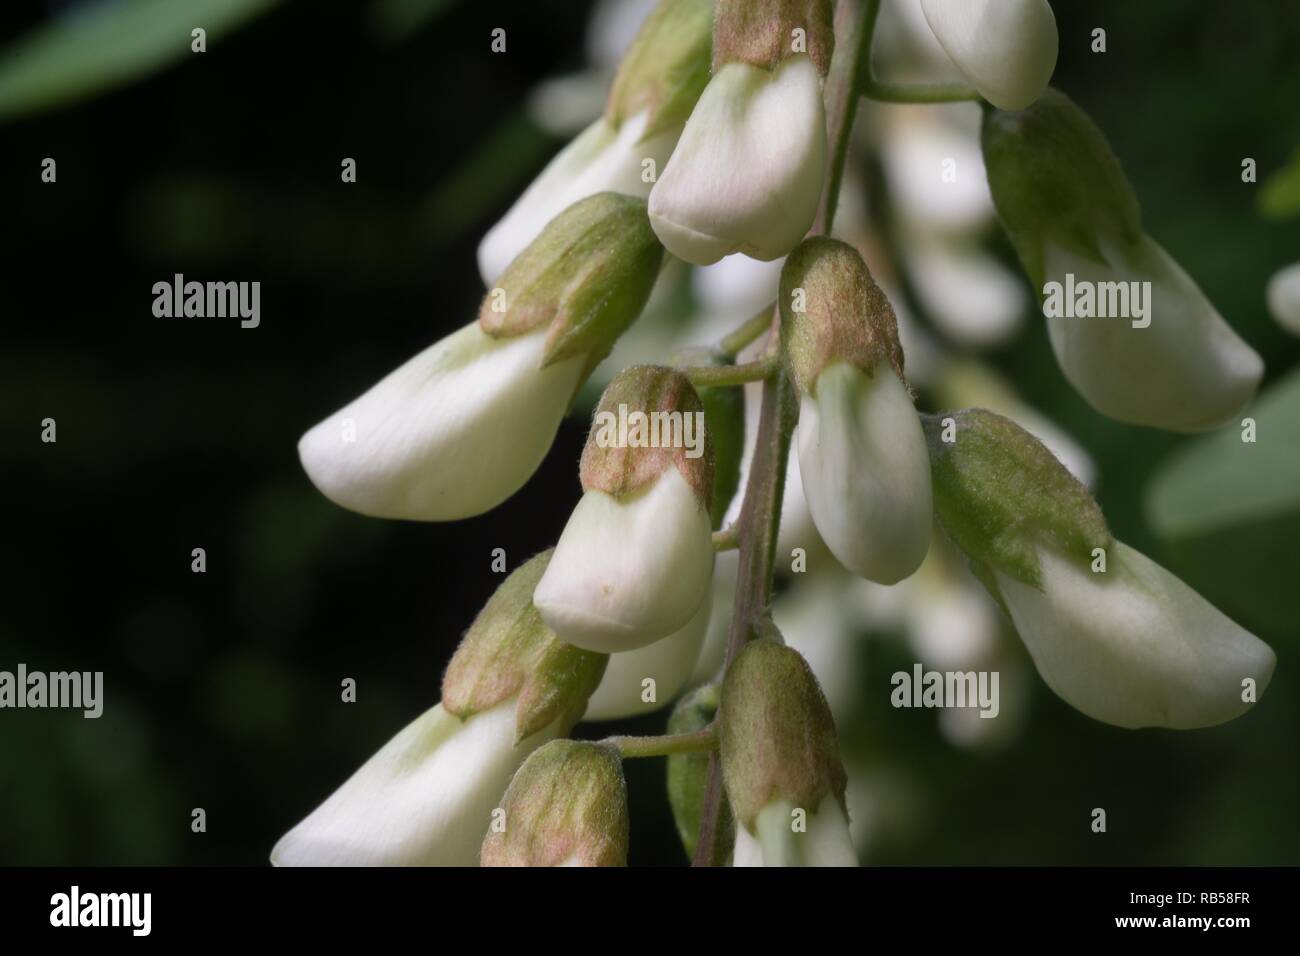 Beautiful White Flower Bud Photography - Outdoor scenic images - Abstract nature background images Stock Photo